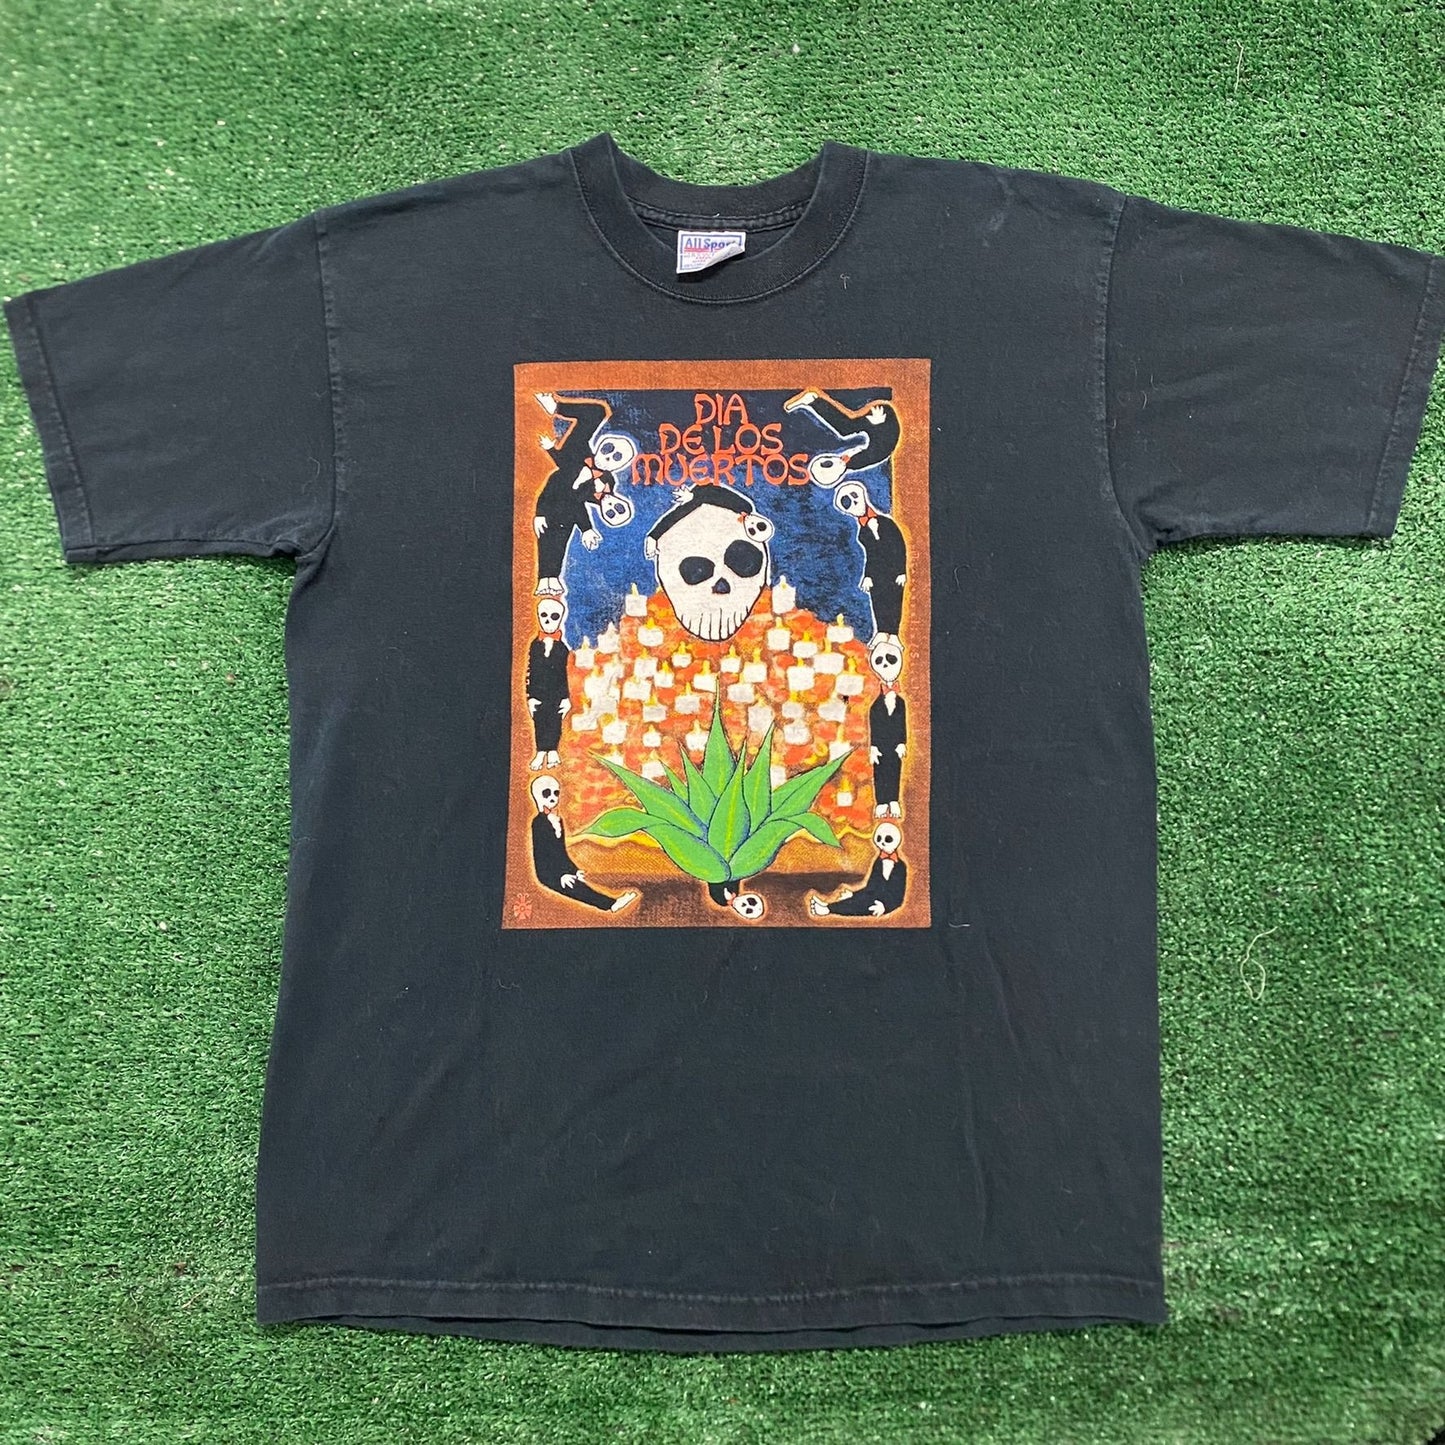 Vintage 90s Day of the Dead Skull Death Gothic Punk Emo Tee